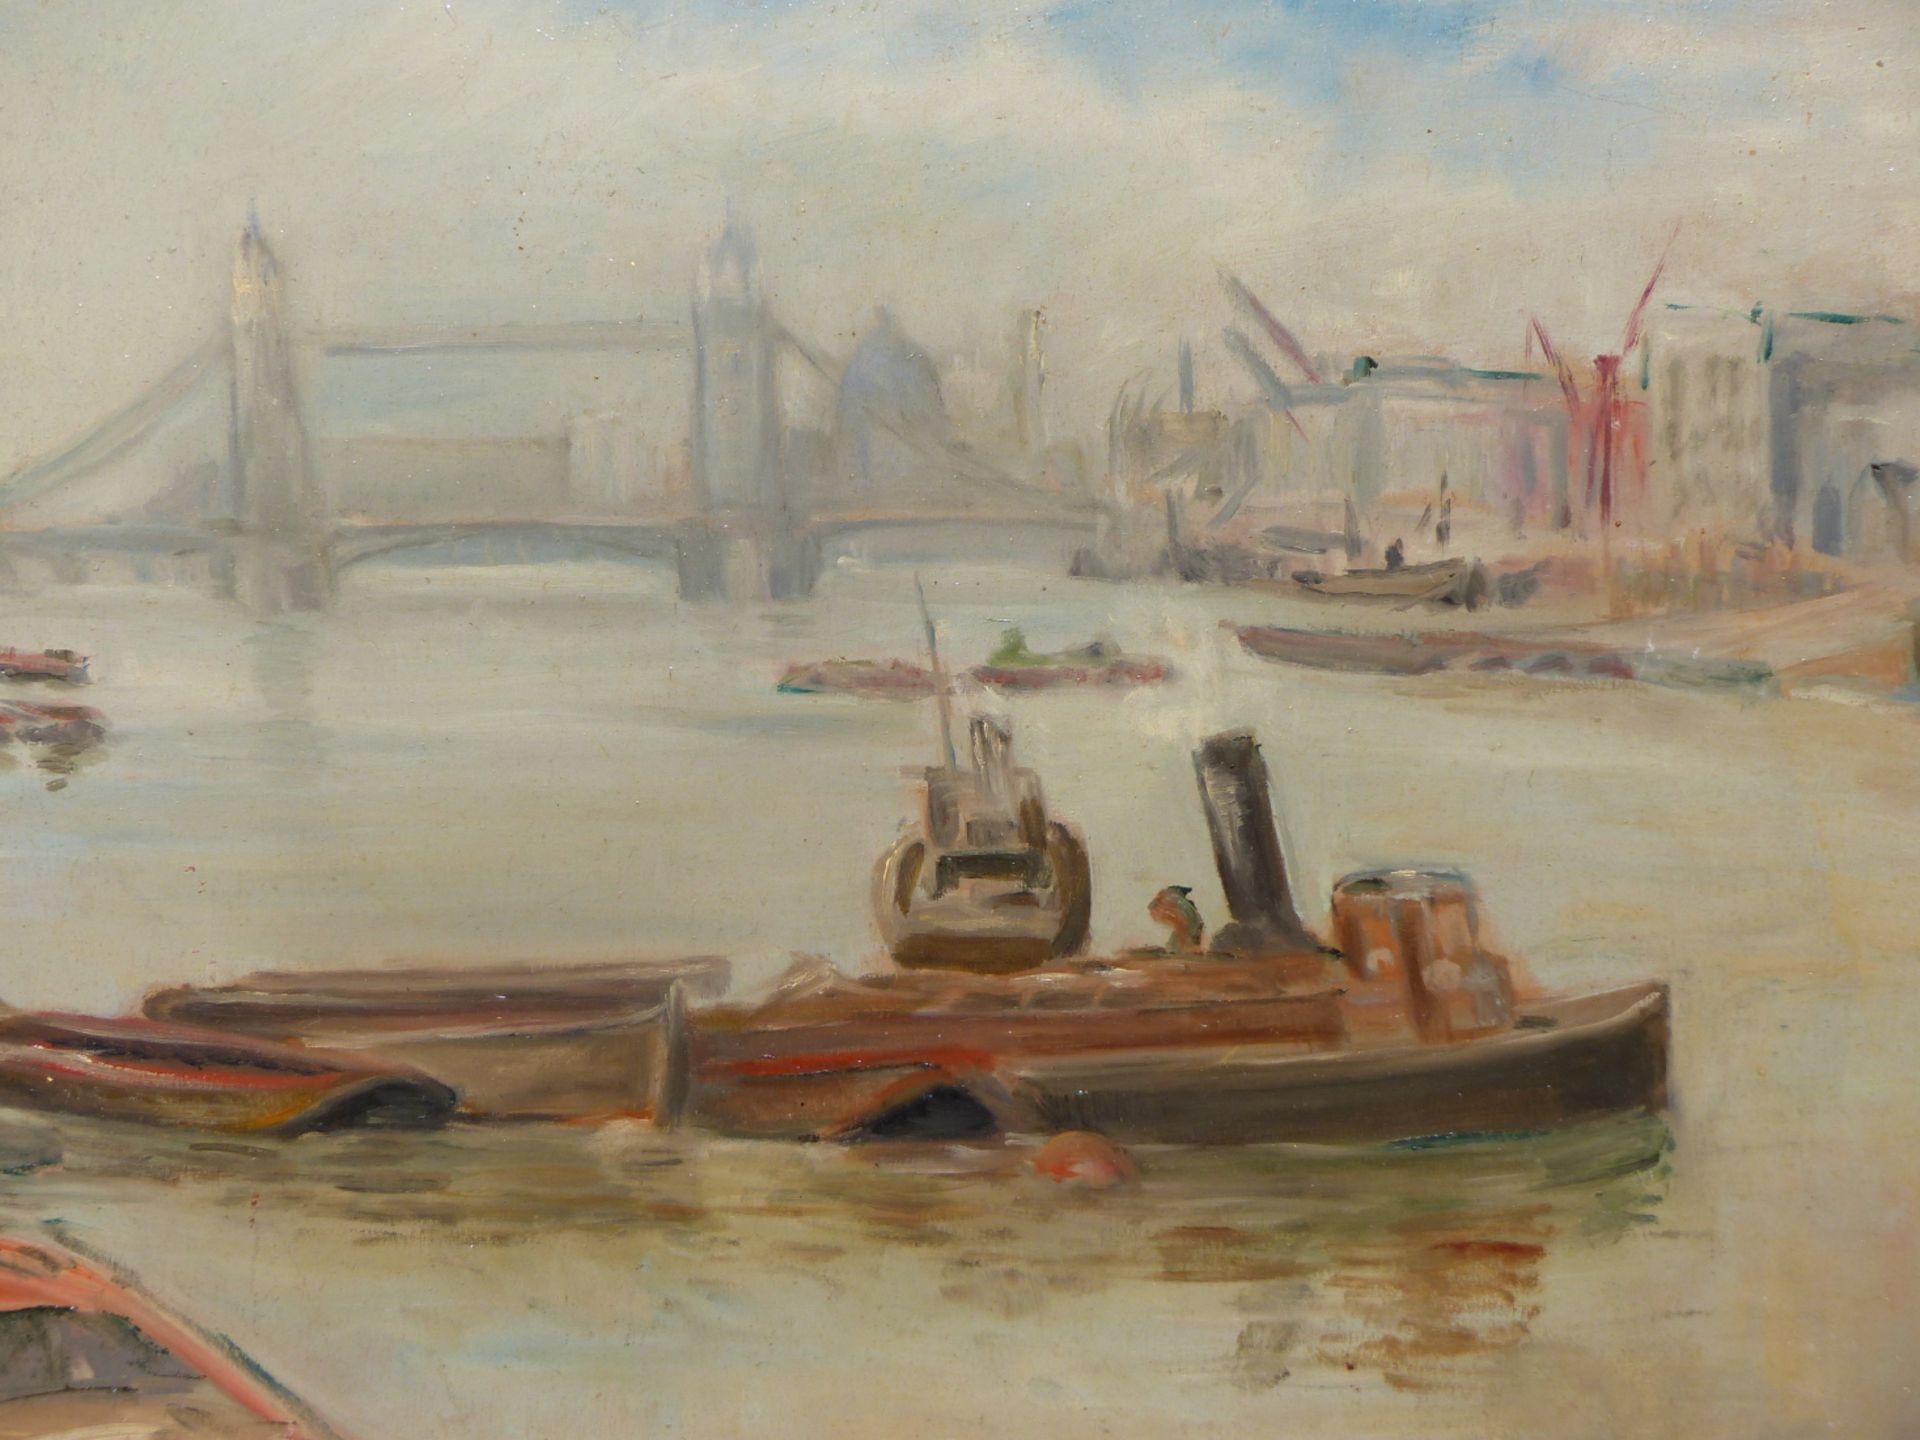 PAULINE BOUMPHREY (1886-1959) AMERICAN, TUG BOAT NEAR A RIVER BRIDGE, SIGNED AND DATED 1953, OIL